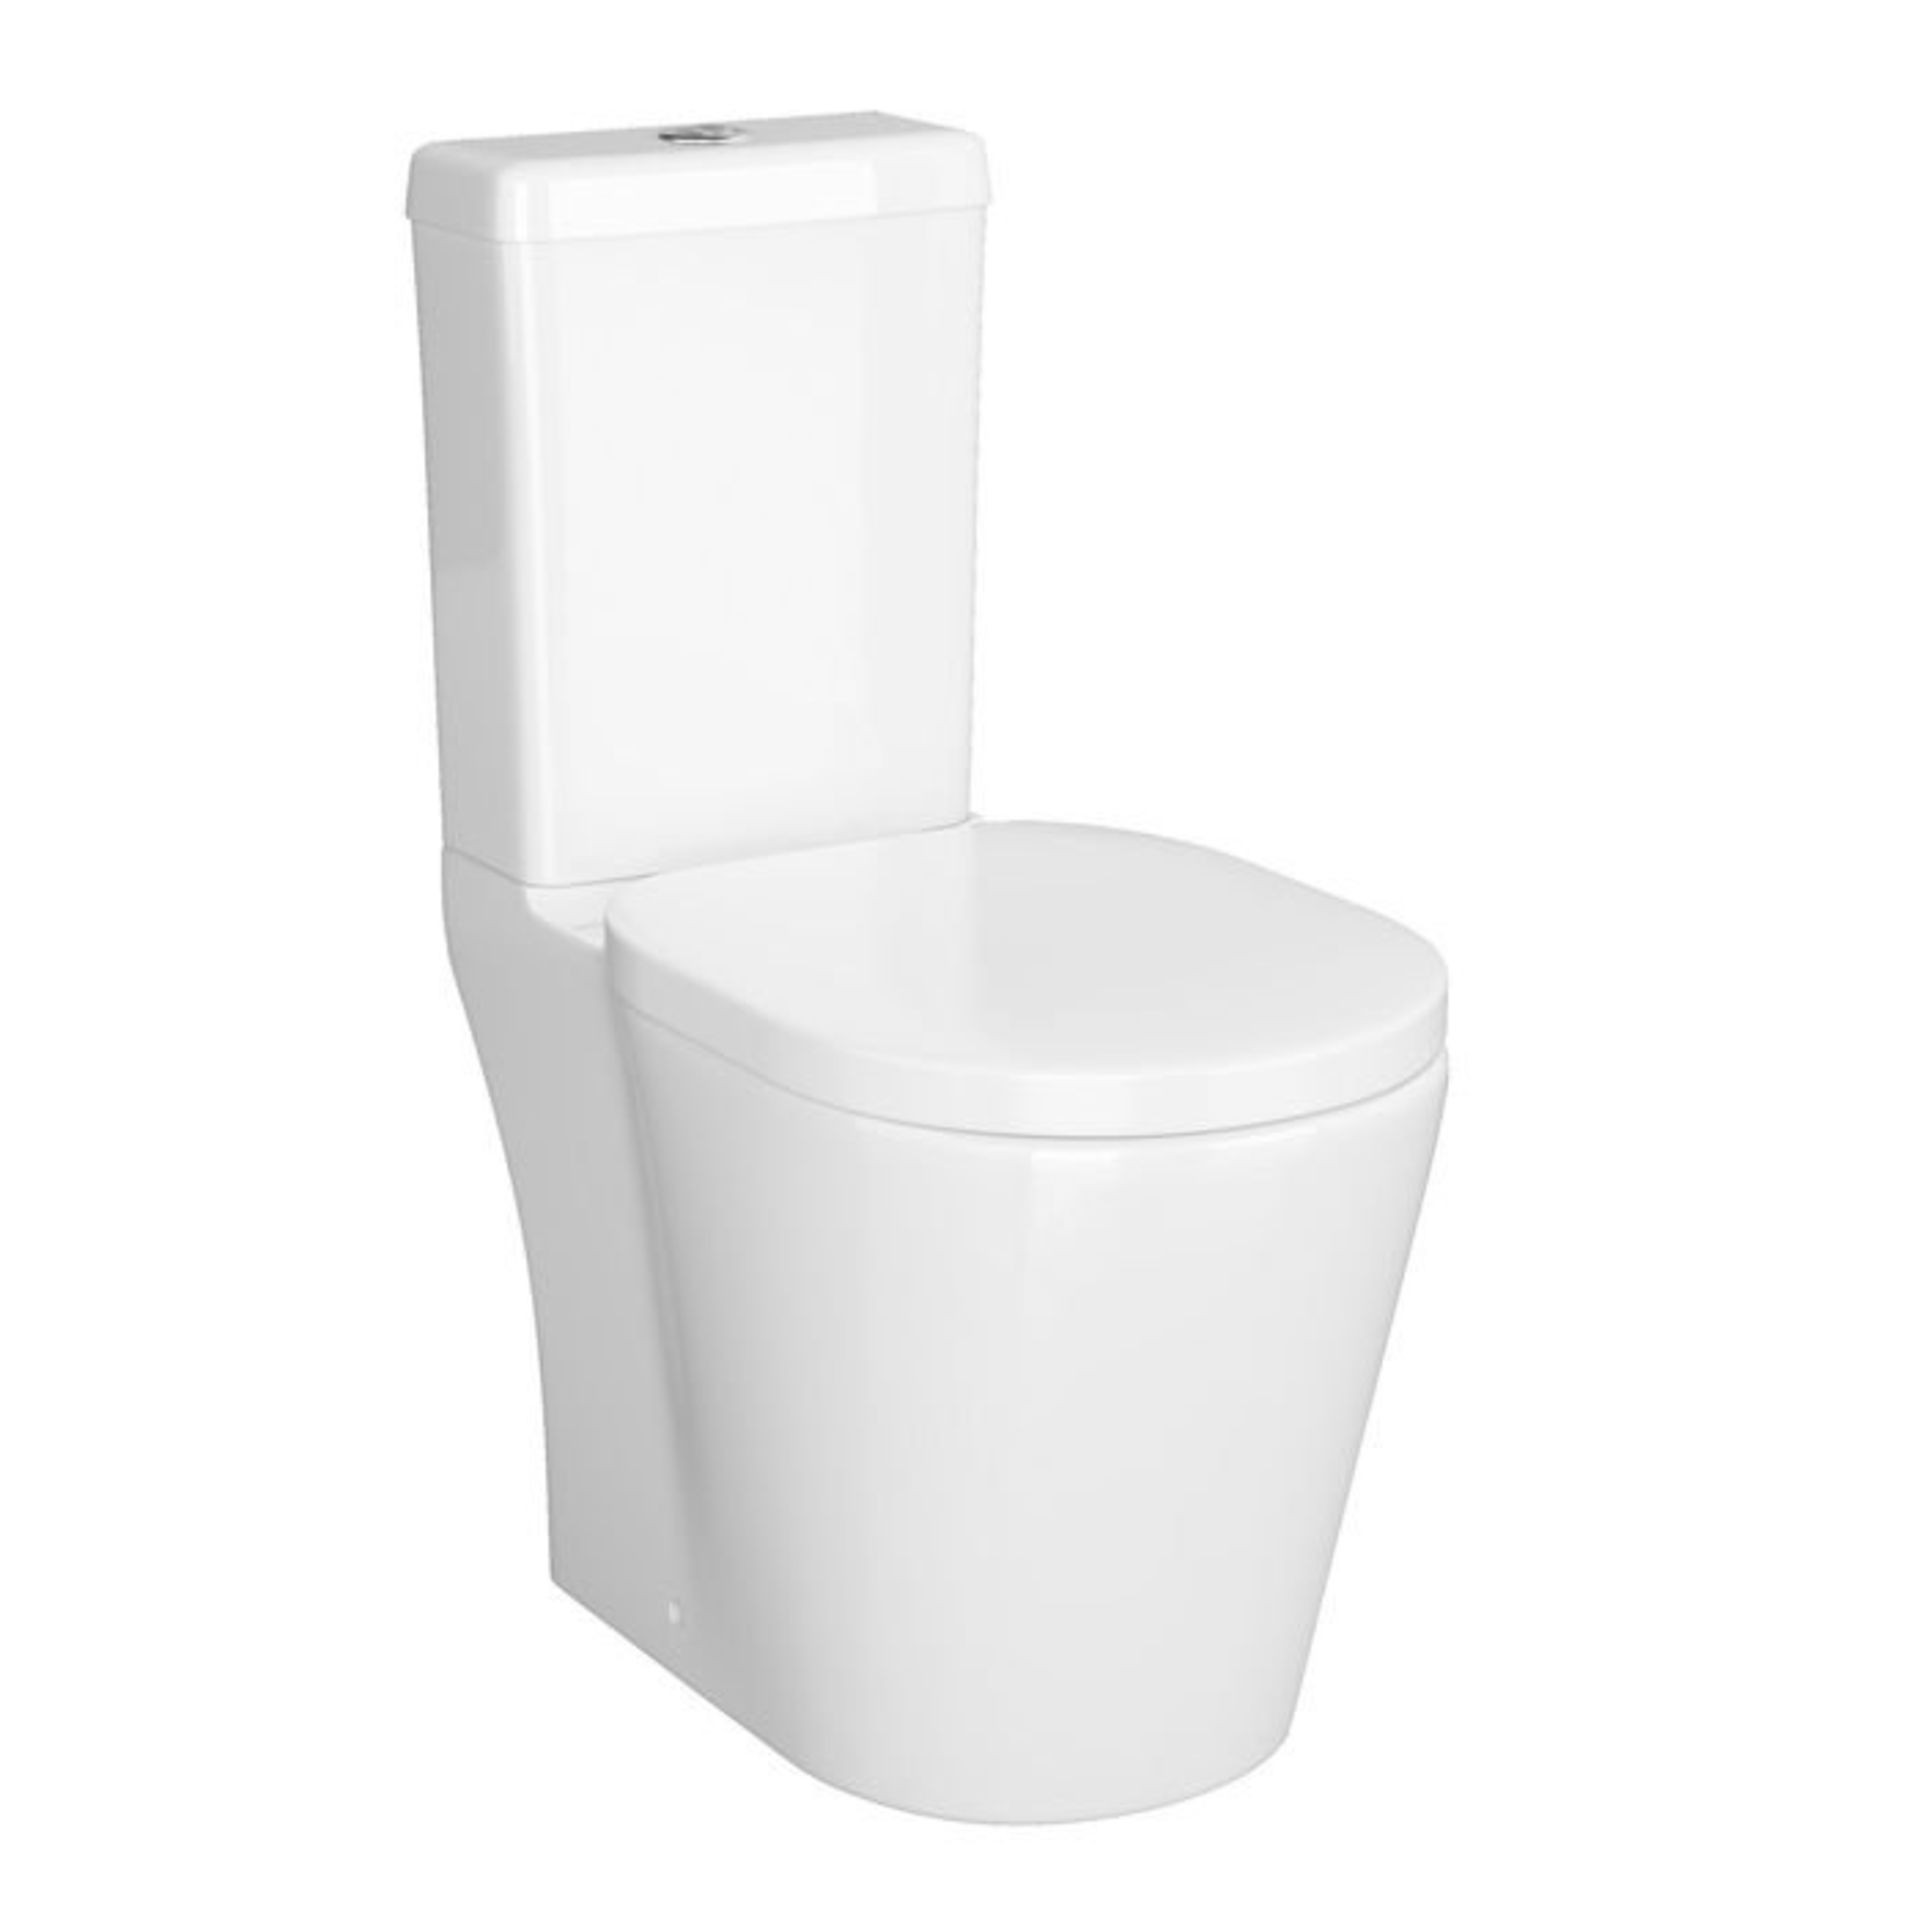 (G14) Albi Close Coupled Toilet & Cistern inc Soft Close Seat RRP £349.99 This innovative toilet - Image 3 of 4